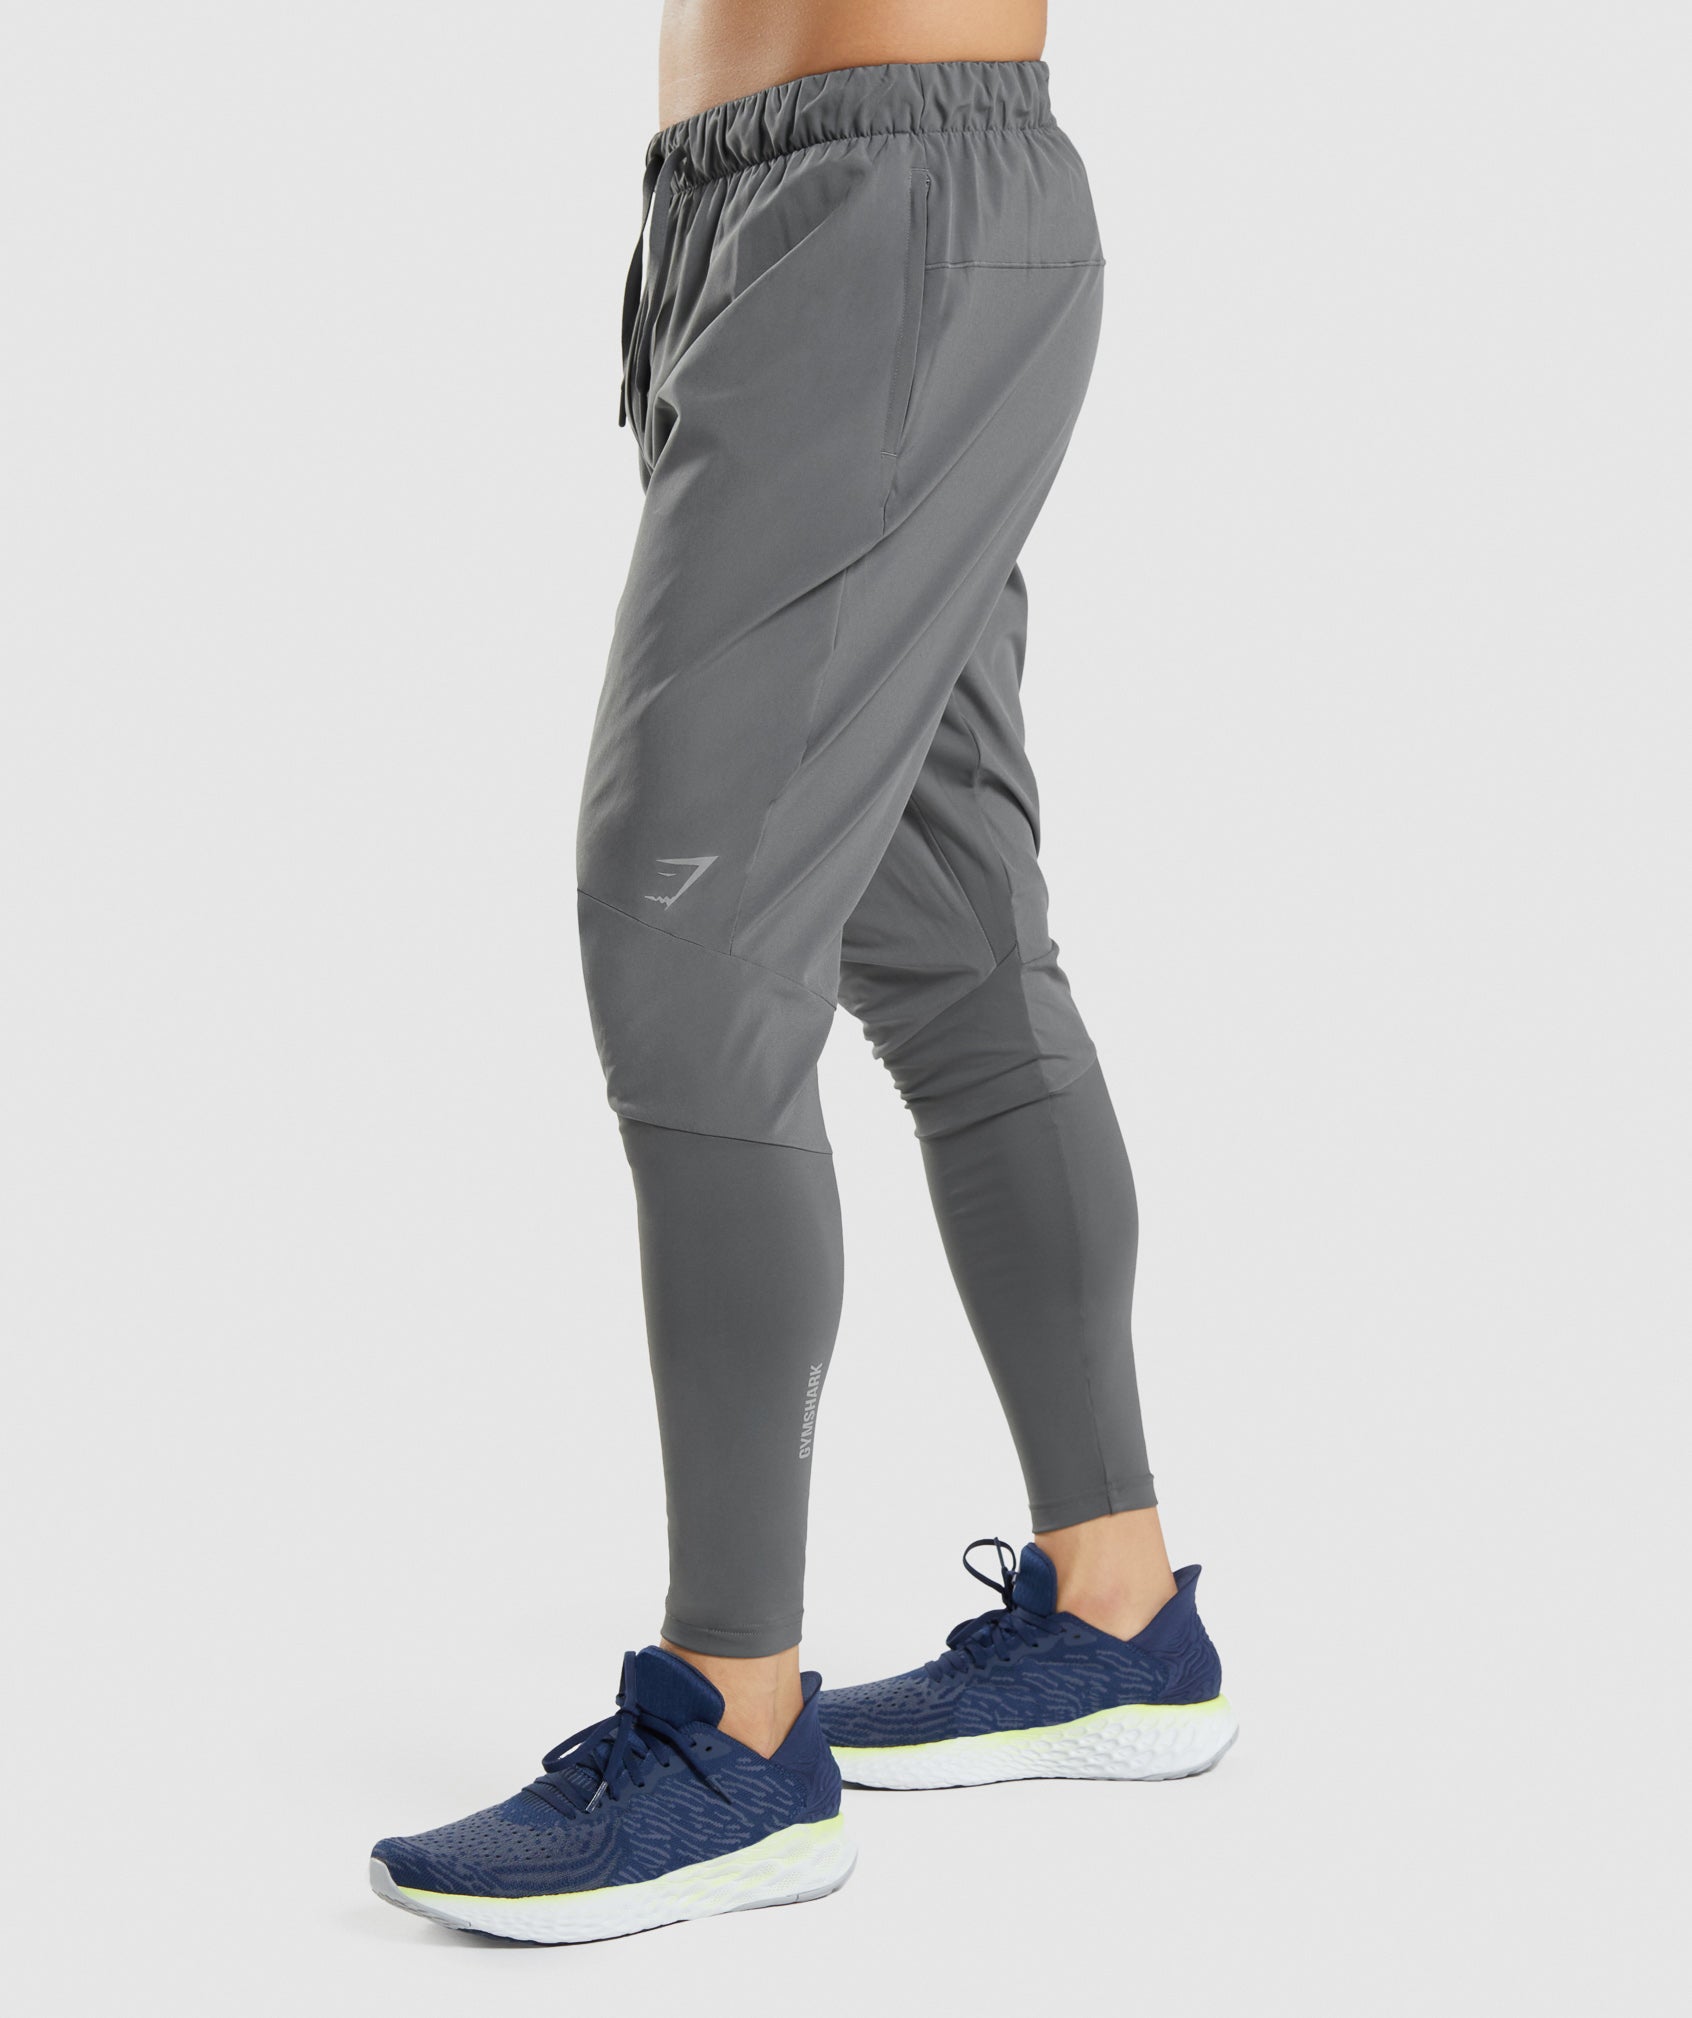 Speed Joggers in Charcoal - view 4